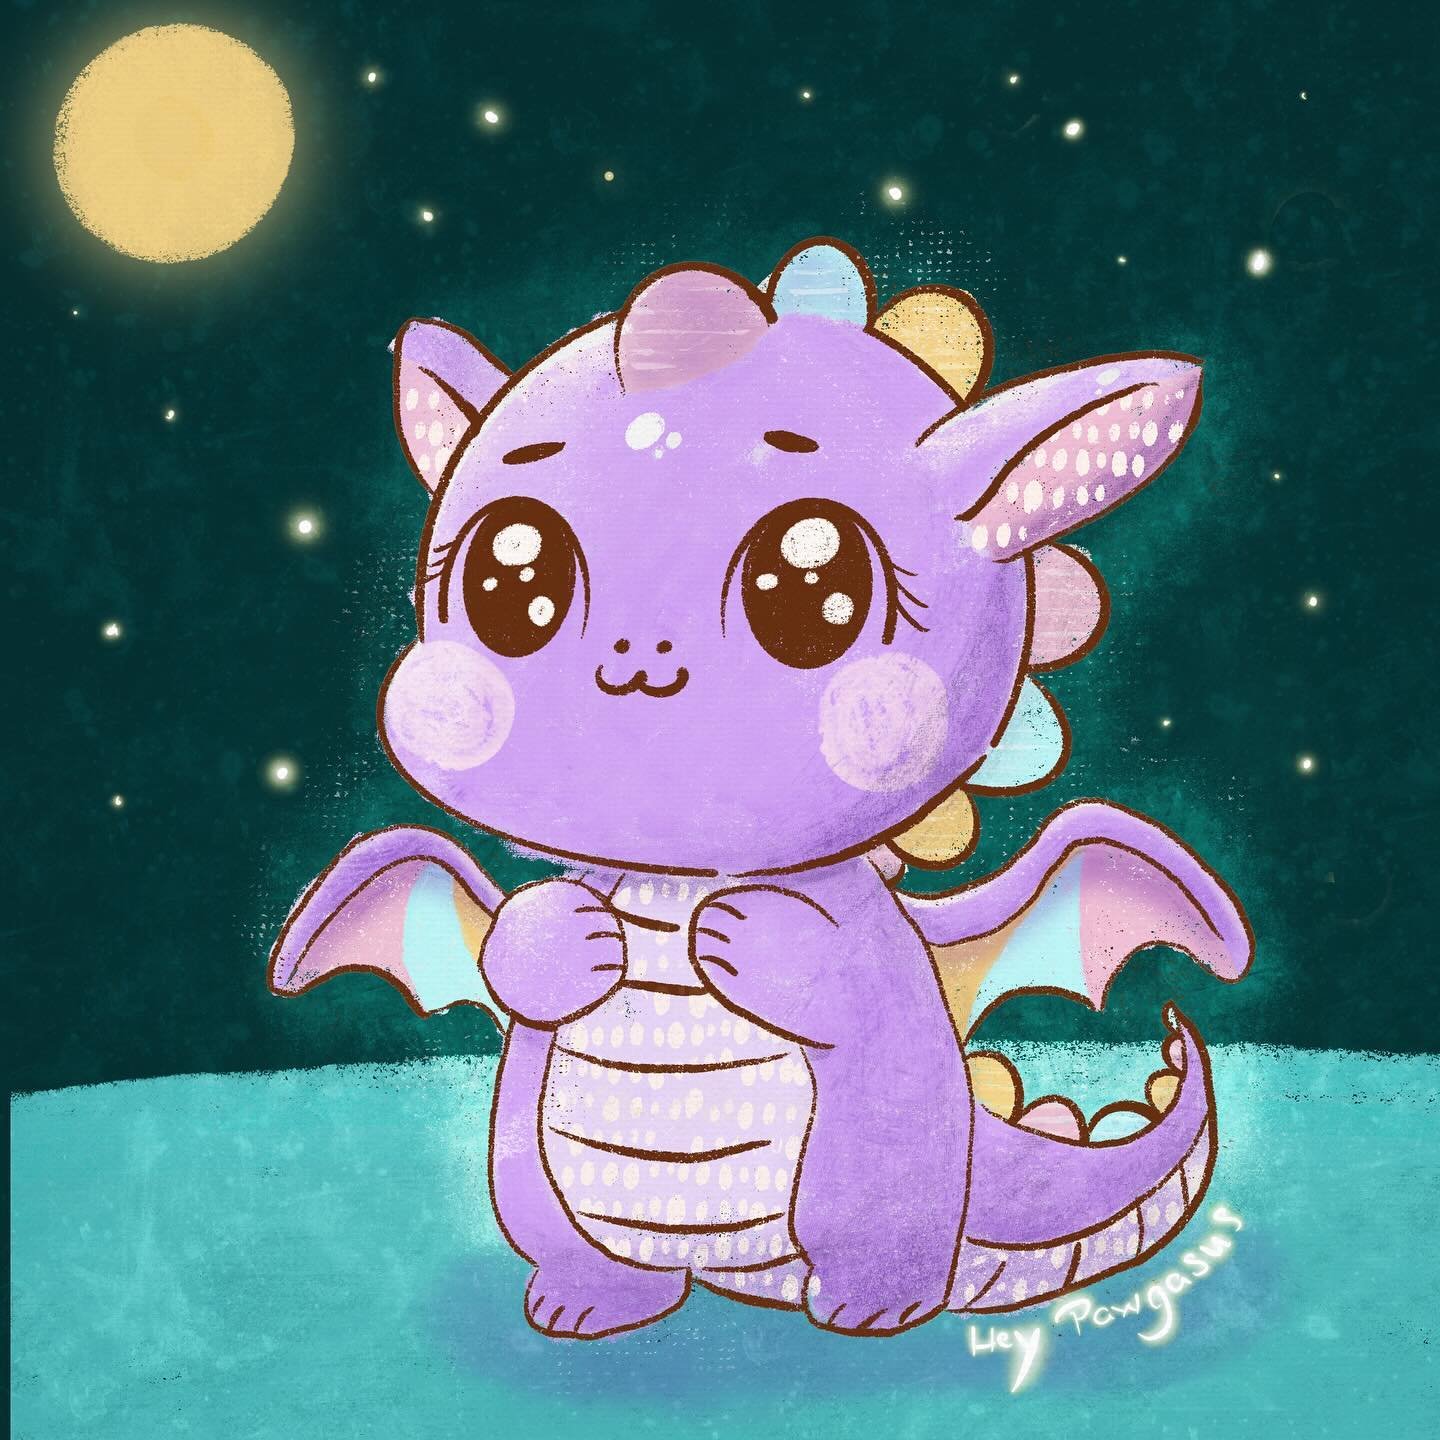 Joining in the #magicalmay2024 with a magical starry night. 

This little dragon is inspired by a #drawithme in the #kawaiidrawingclub by @tatyanadeniz 

Thanks to the lovely hosts of Magical May 2024:
@nebulala.art
@bears.affirmations
@mpusdraw
@igg